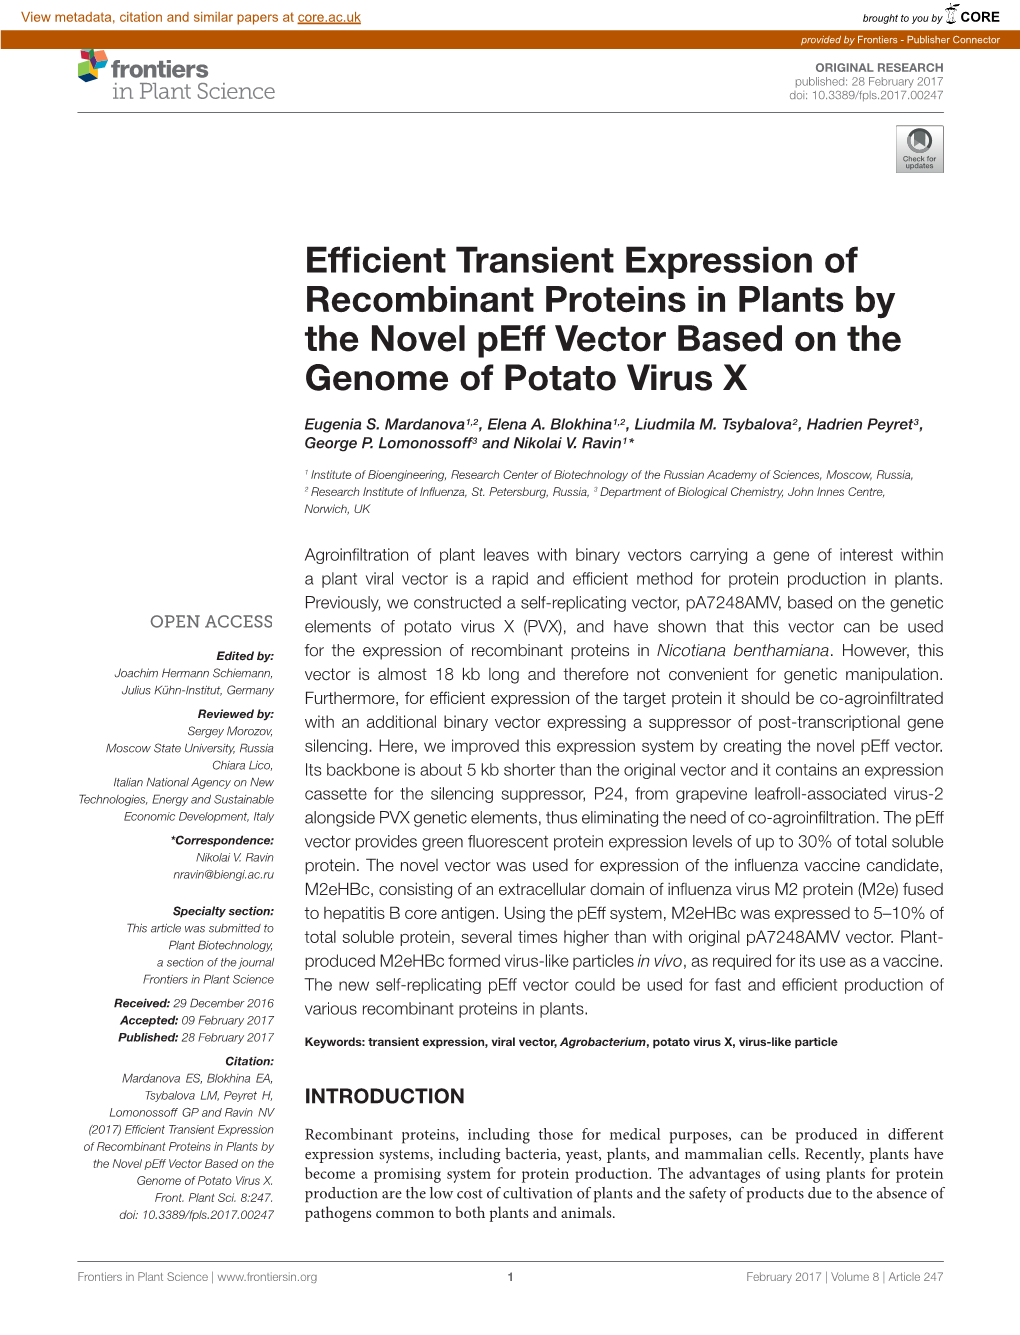 Efficient Transient Expression of Recombinant Proteins in Plants By